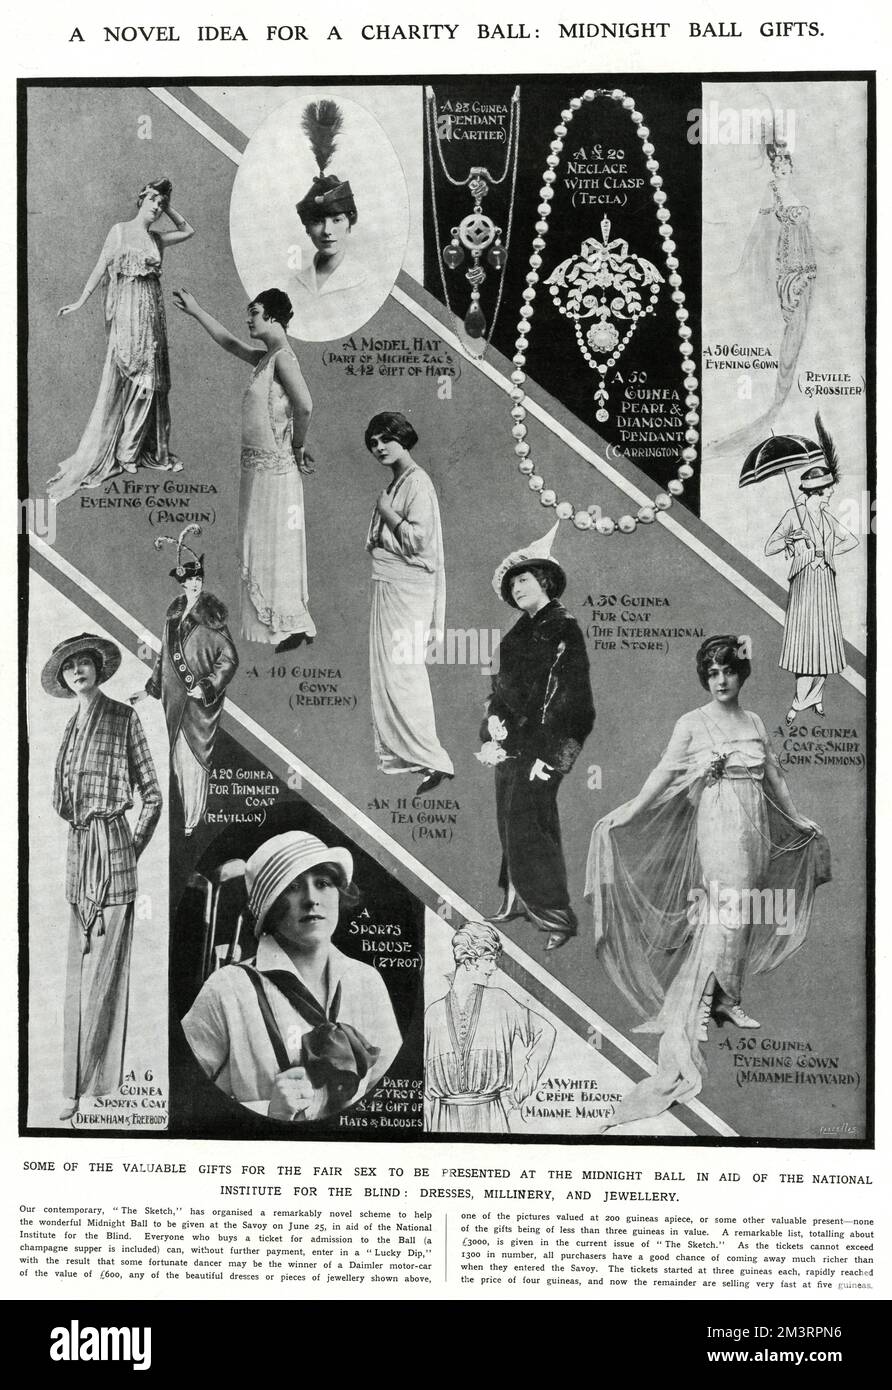 Pre World War One charity midnight ball, in aid of 'The National Institute for the Blind', taking place at the 'Savoy' on 25 June, everyone who attended bought a ticket for a lucky-dip, with the winner receiving a Daimer motor-car of the value of 600 and any of the beautiful dresses shown or a piece of jewellery, the total amount 3000.     Date: 1914 Stock Photo